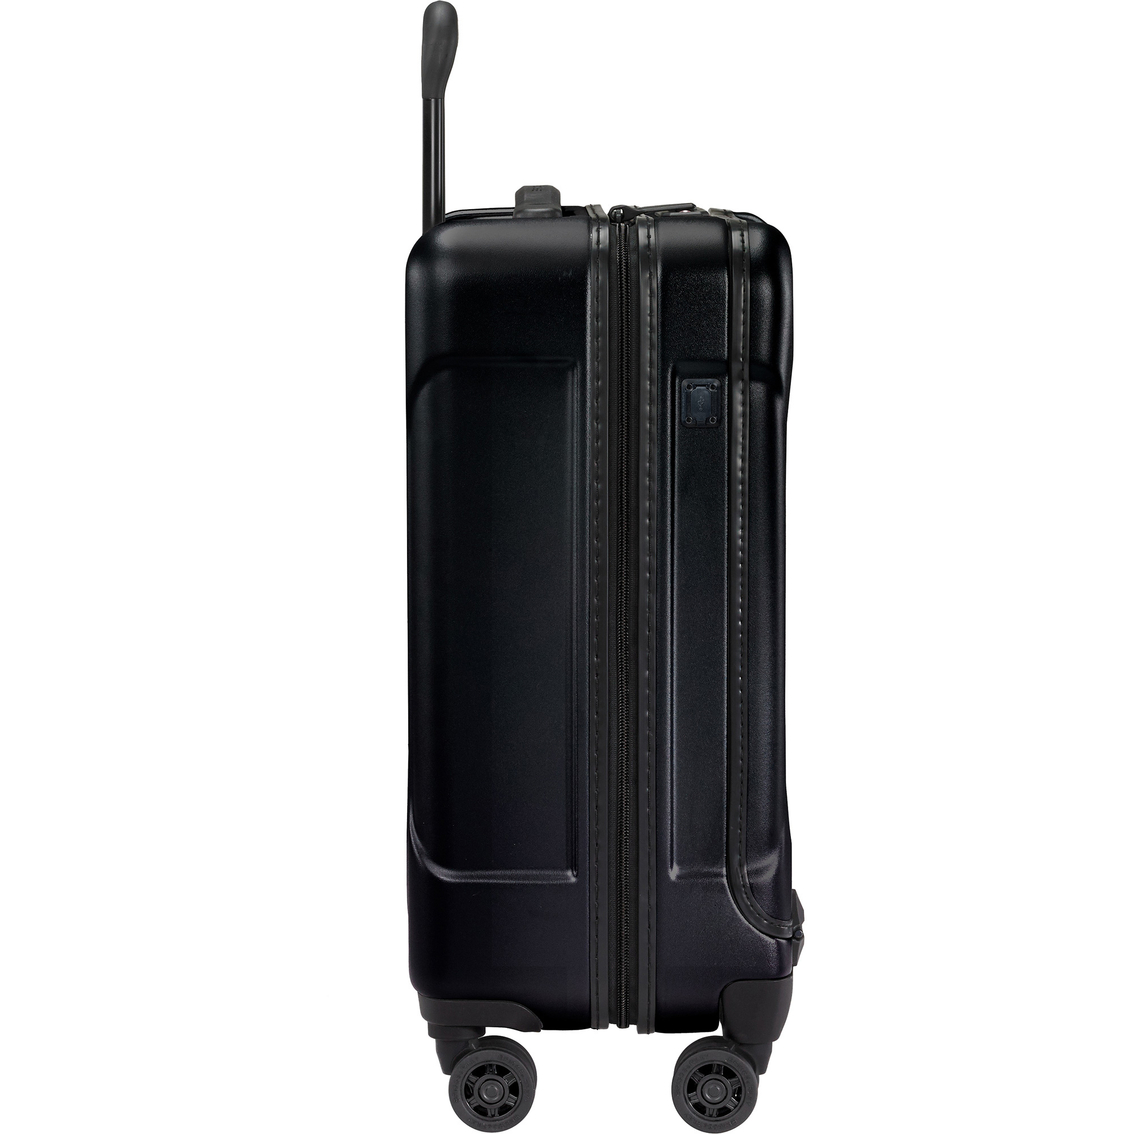 Briggs & Riley International Torq 21 in. Stealth Carry-On Spinner - Image 5 of 10